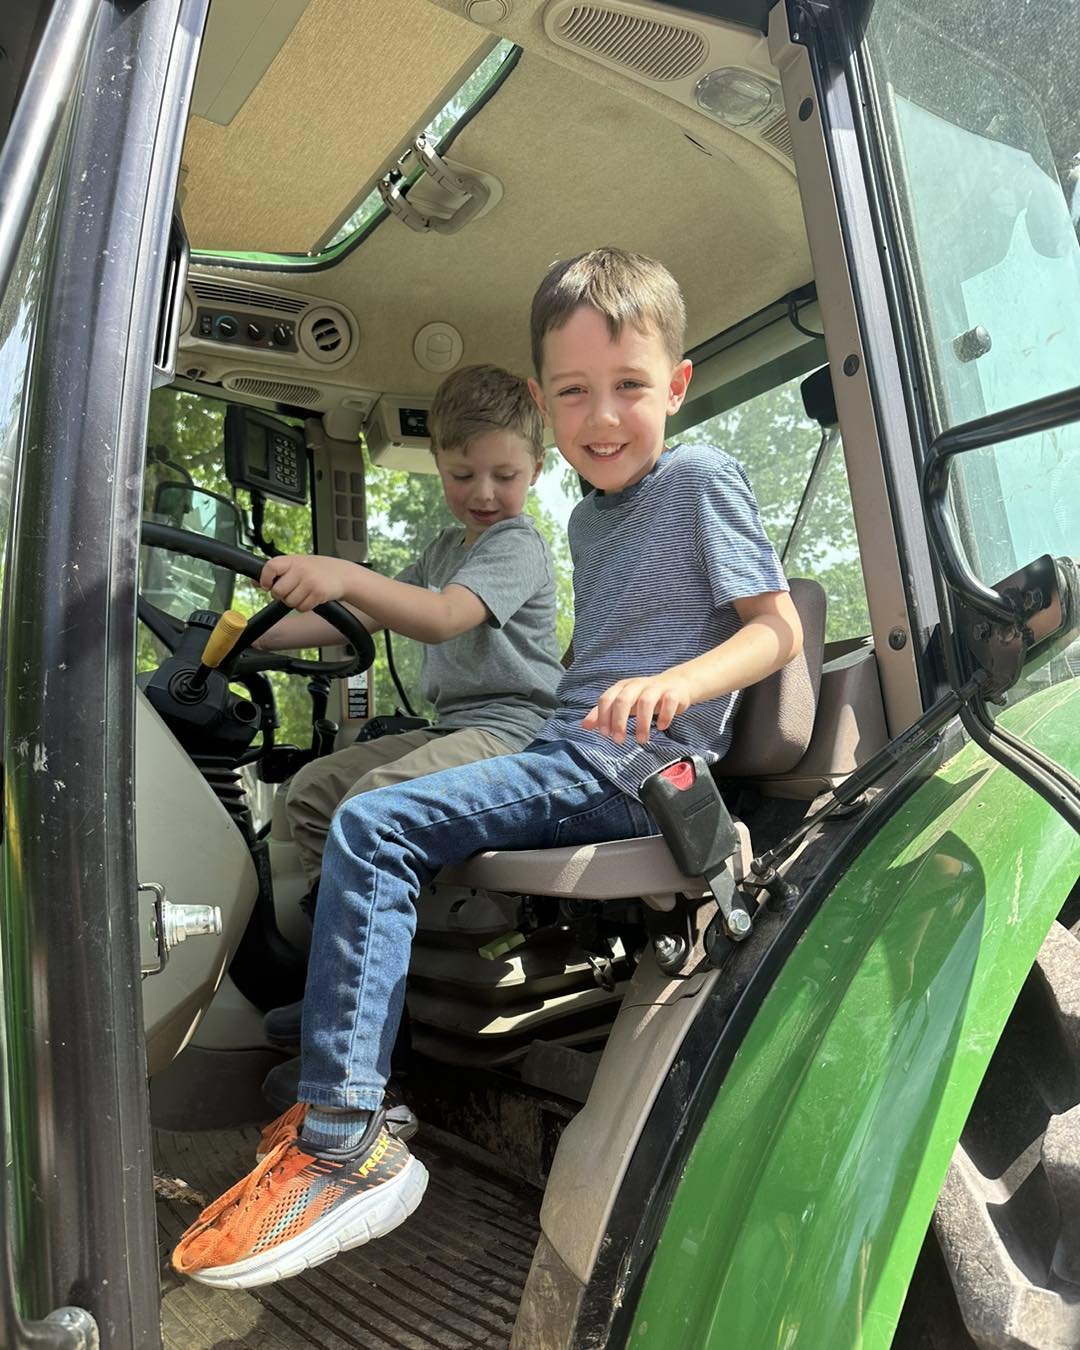 The FCA Cub Club K4 classes had so much fun visiting the farm with Mrs. Moore! They were able to sit in the tractor, feed the goats, play in the river, and even ride a pony. They had such a wonderful time on their first field trip! #fca #farm  #presc